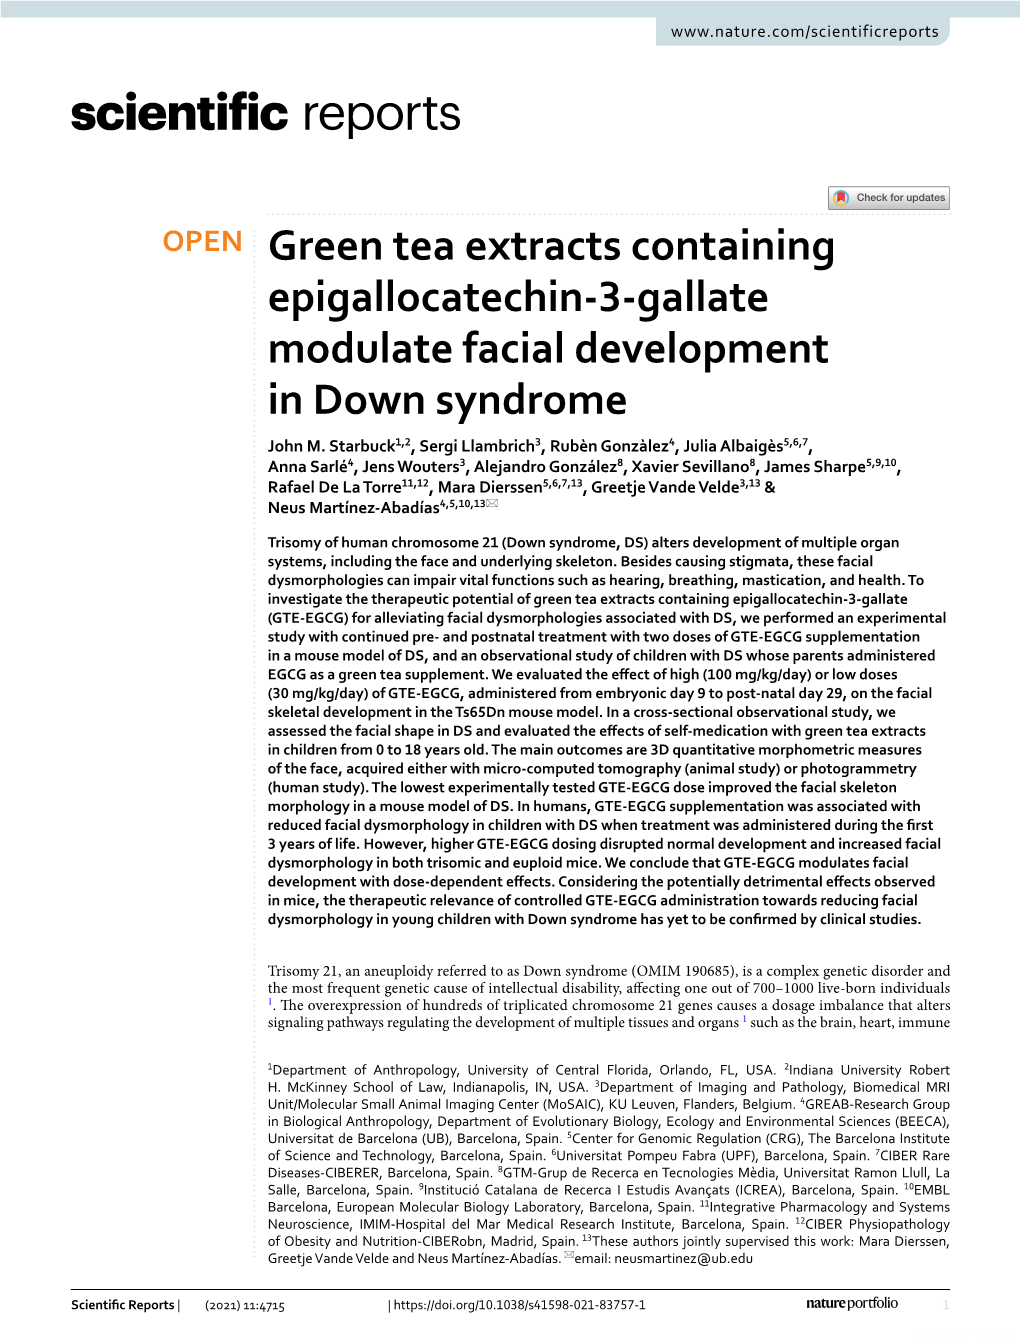 Green Tea Extracts Containing Epigallocatechin-3-Gallate